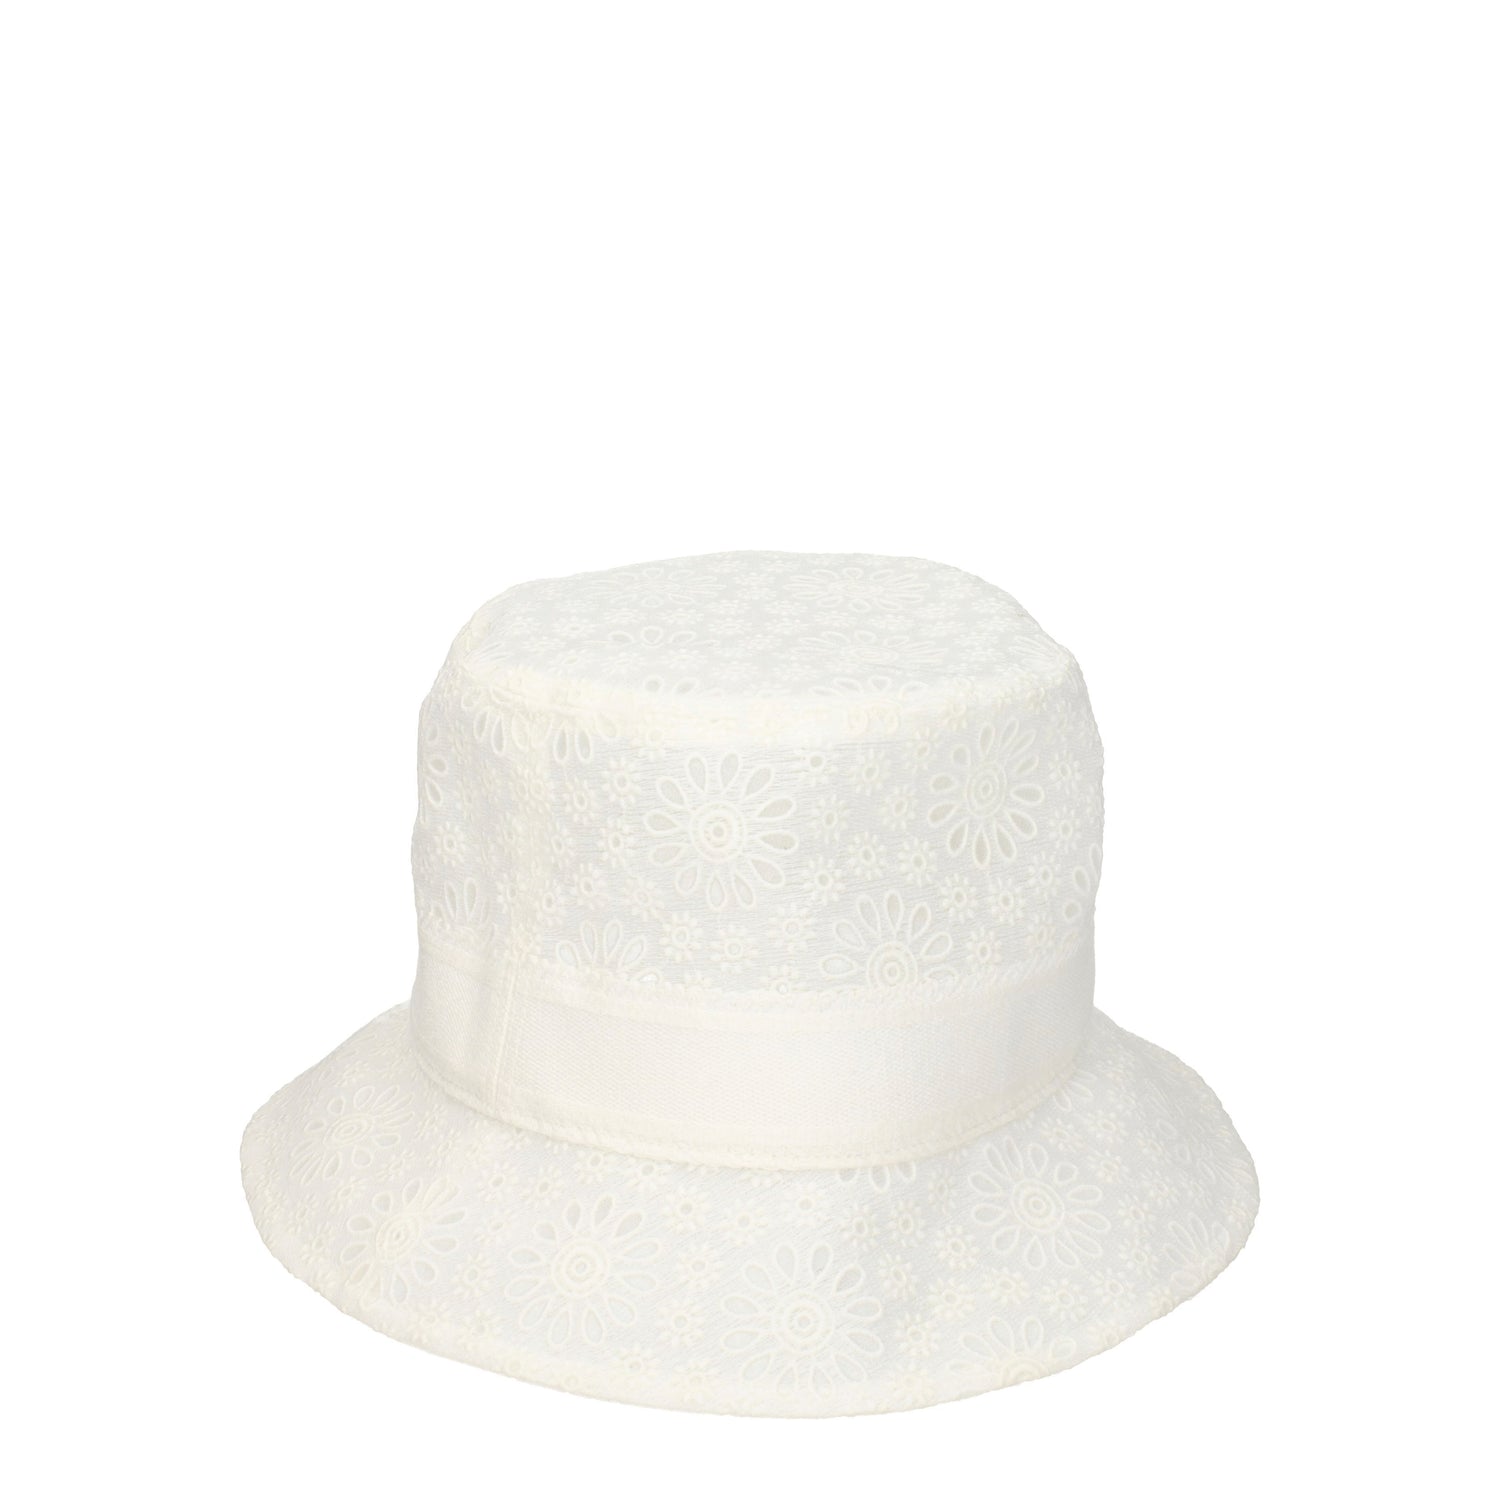 Christian Dior Cappelli lady Donna Poliestere Bianco